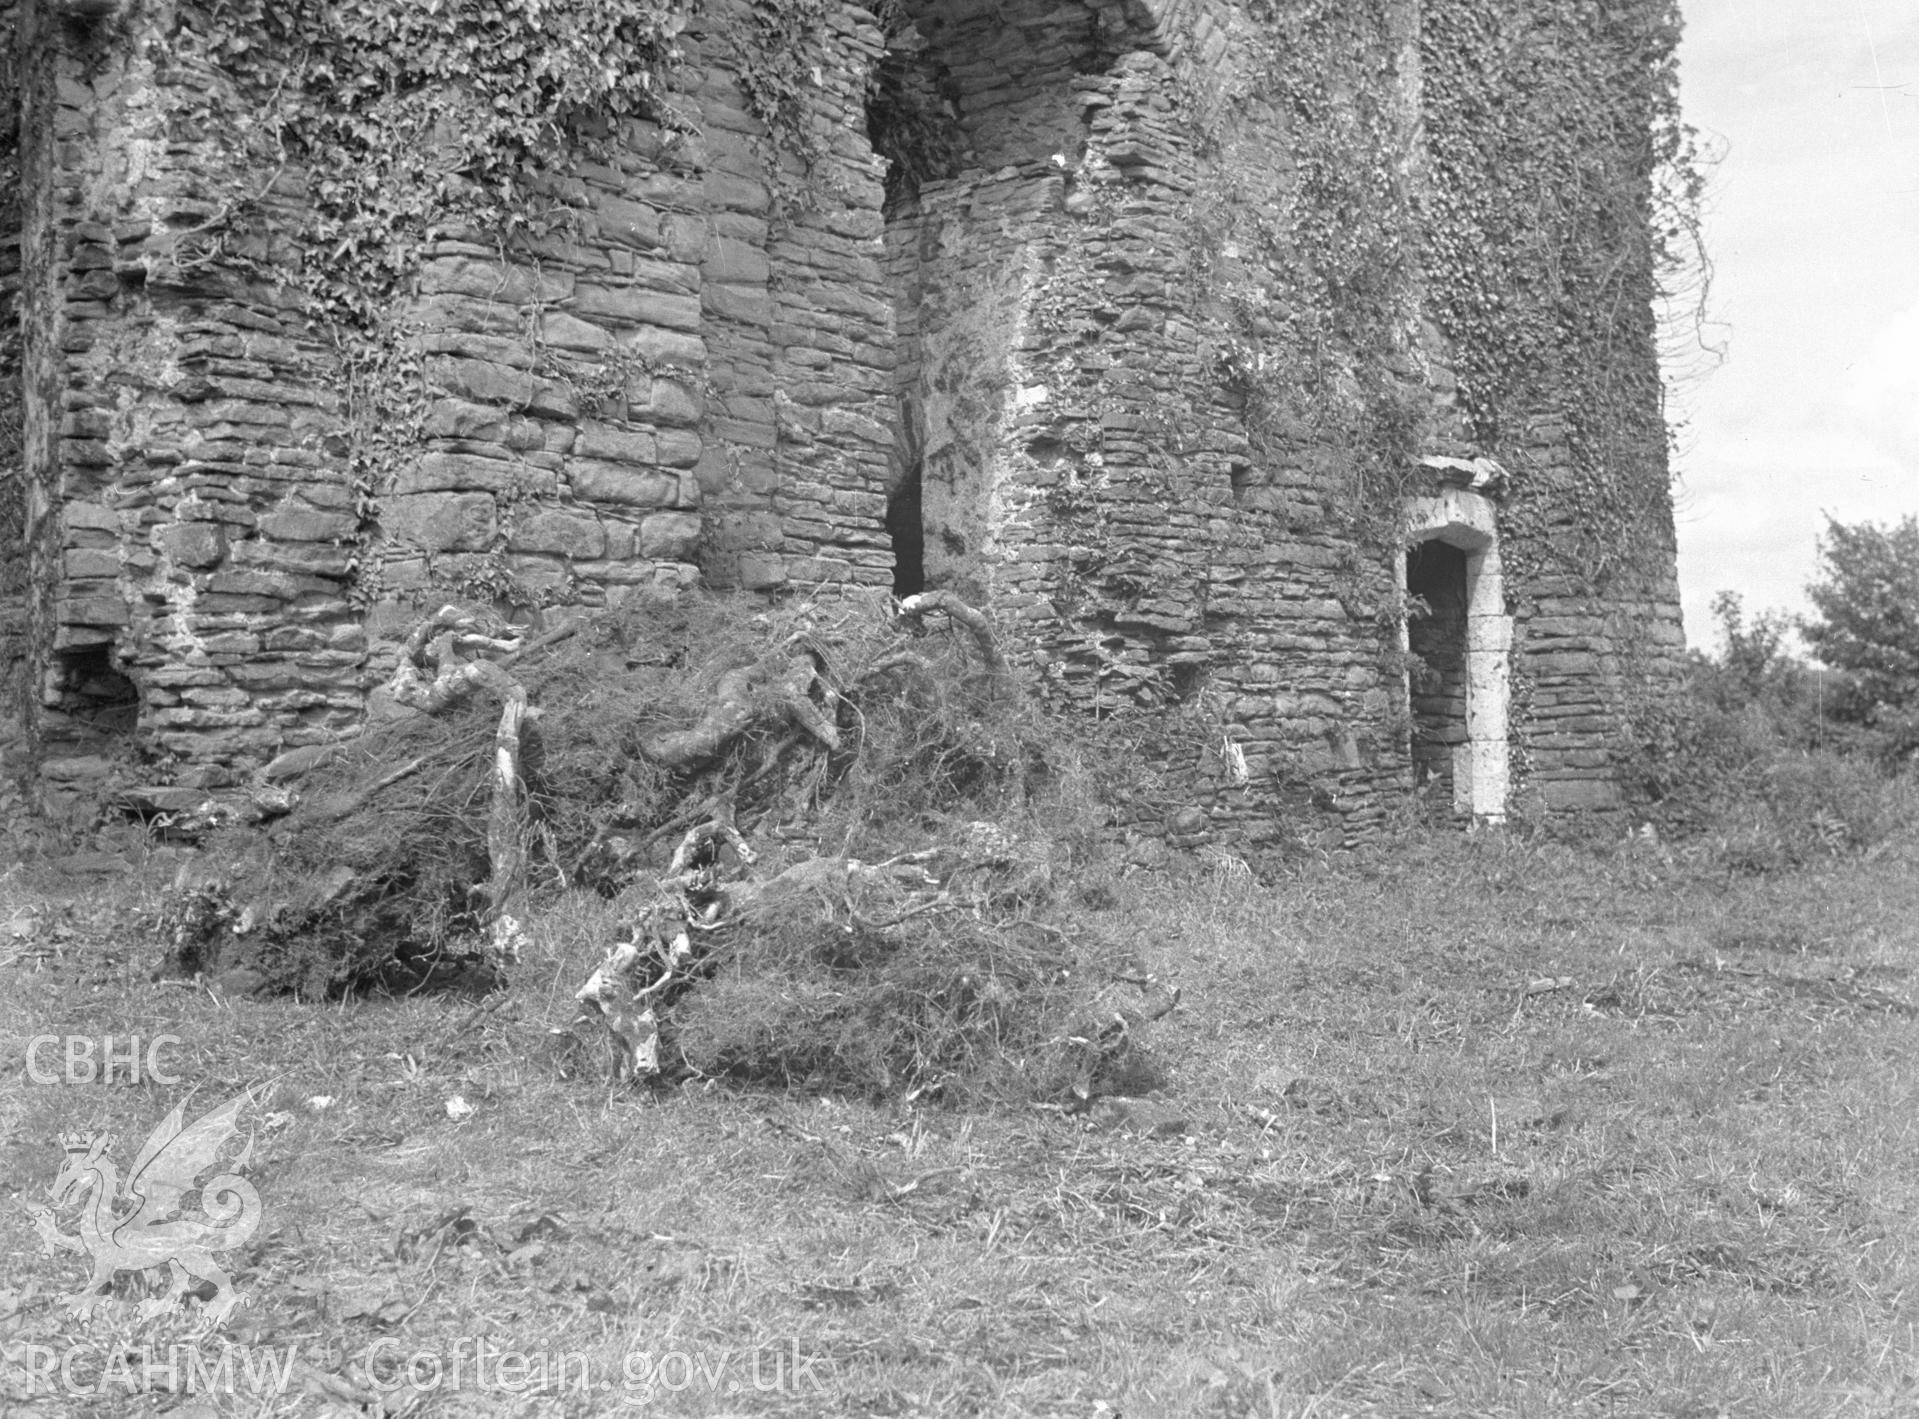 Digital copy of a nitrate negative showing root removal carried out at Neath Abbey.